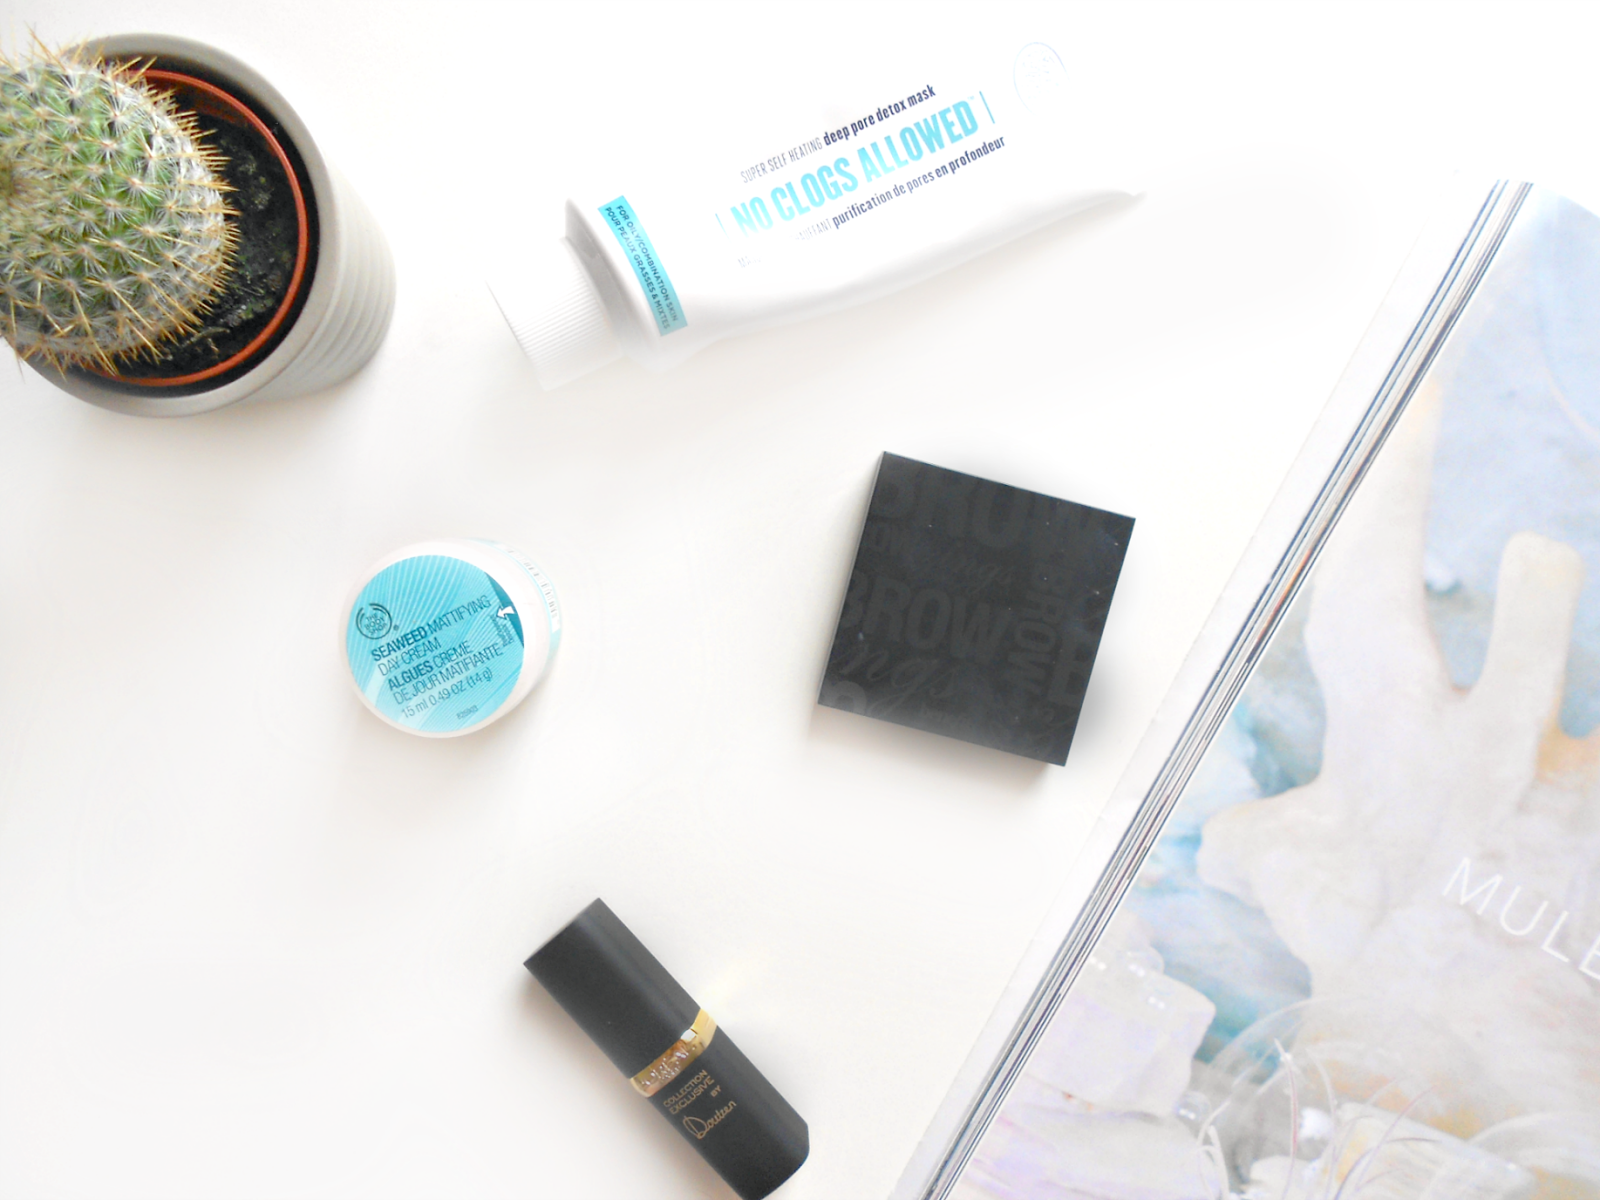 4 Products I wouldn't Repurchase